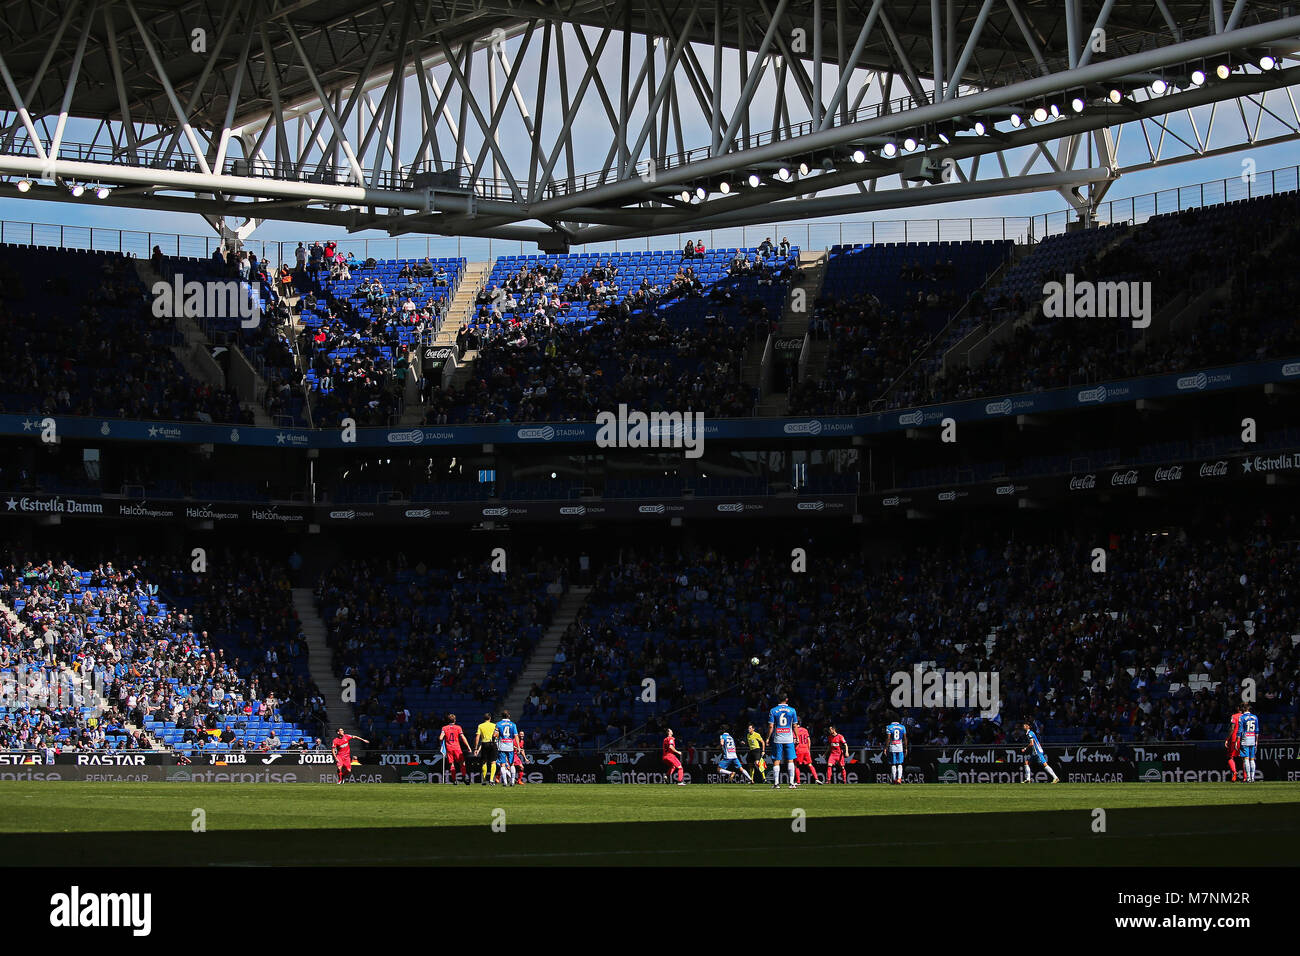 RCD Espanyol attack during the match between RCD Espanyol and Real Sociedad, on 11th March 2018, in Barcelona, Spain. Credit: Gtres Información más Comuniación on line, S.L./Alamy Live News Stock Photo